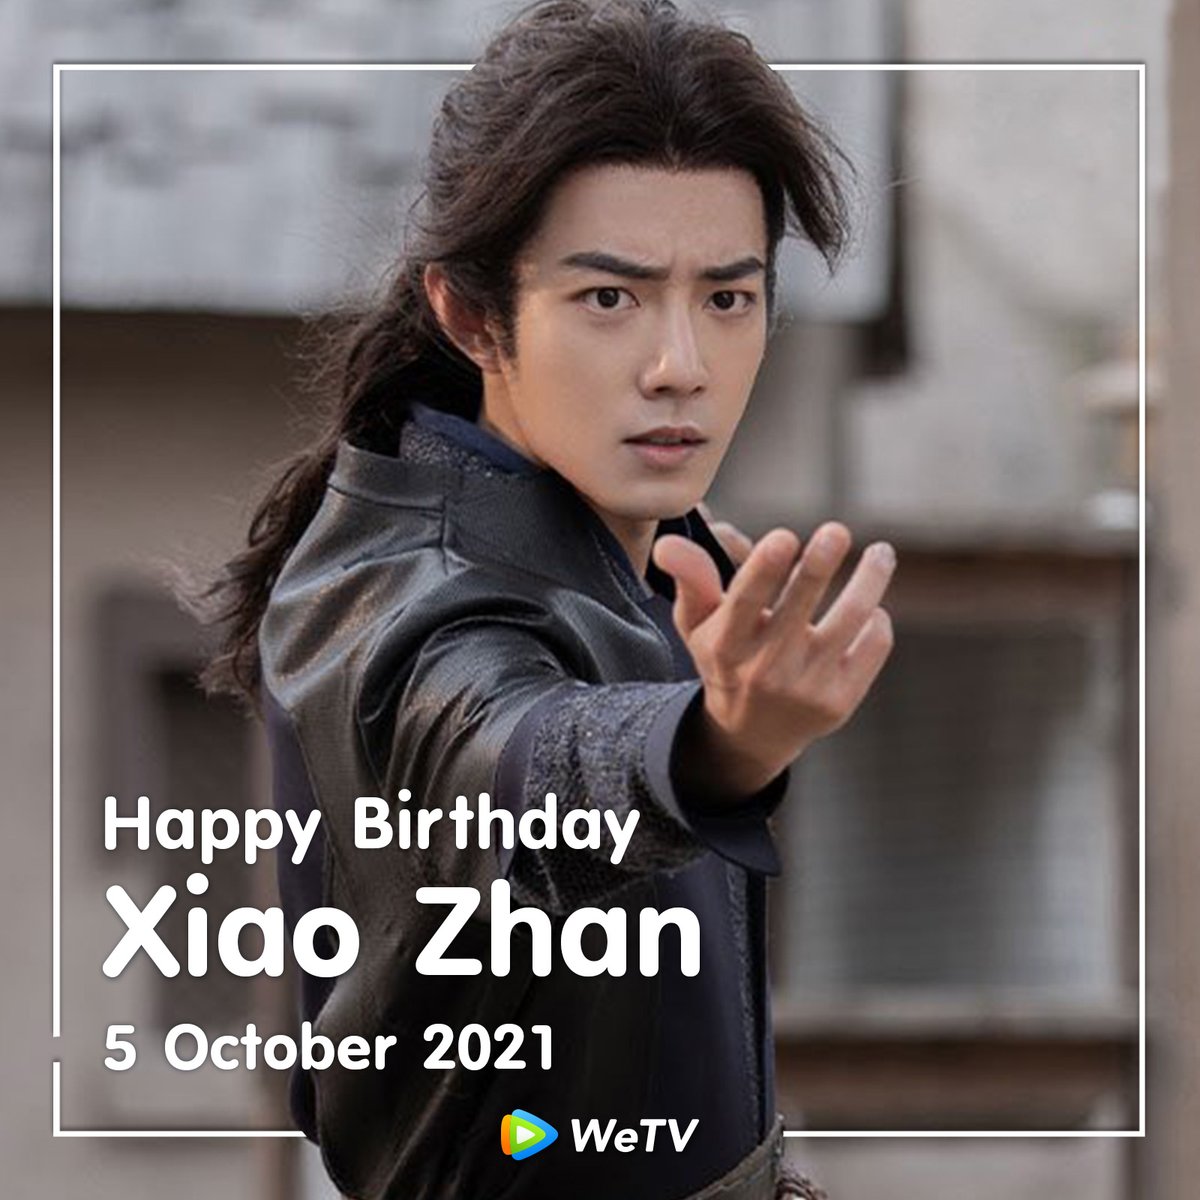 🎂HAPPY BIRTHDAY XIAO ZHAN🎂
Drop your greetings and your big smile for our ambassador #XiaoZhan here. 😊

Stay tuned for more of his content here on WeTV 👉 bit.ly/2FKk4lA.

#XiaoZhan30thBirthday
#Th30nlyXiaoZhan 
#WeTVPinas 
#WeTVAlwaysG